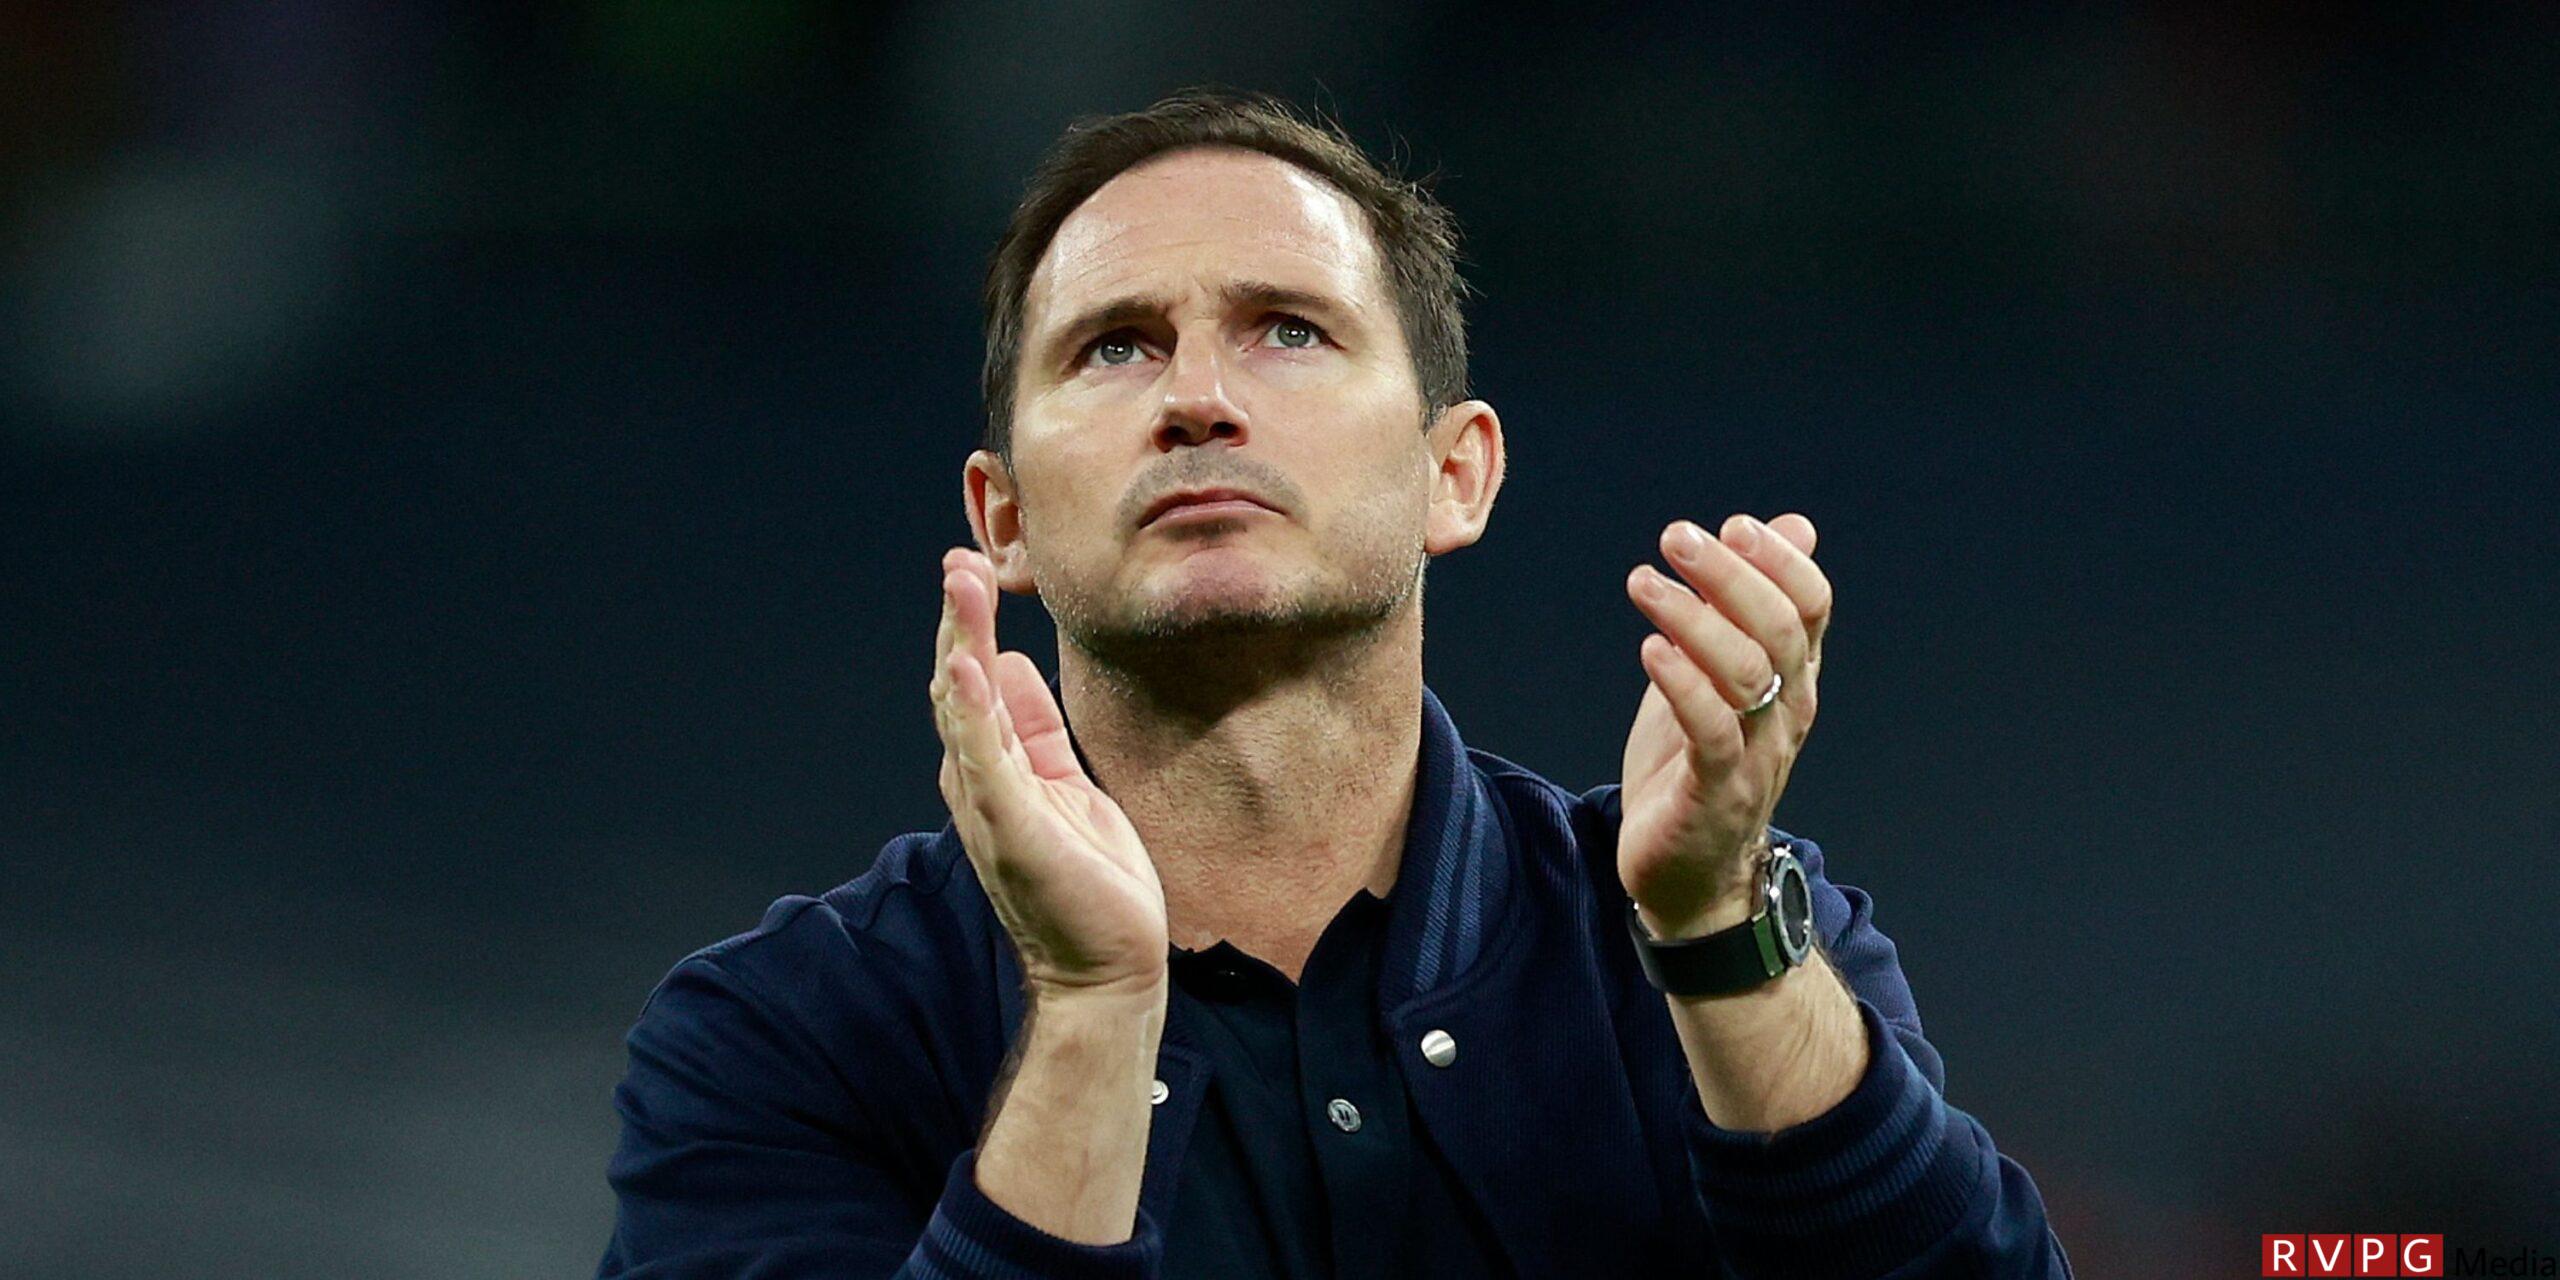 Derby made a mistake by signing Lampard, whose value has fallen by 96%